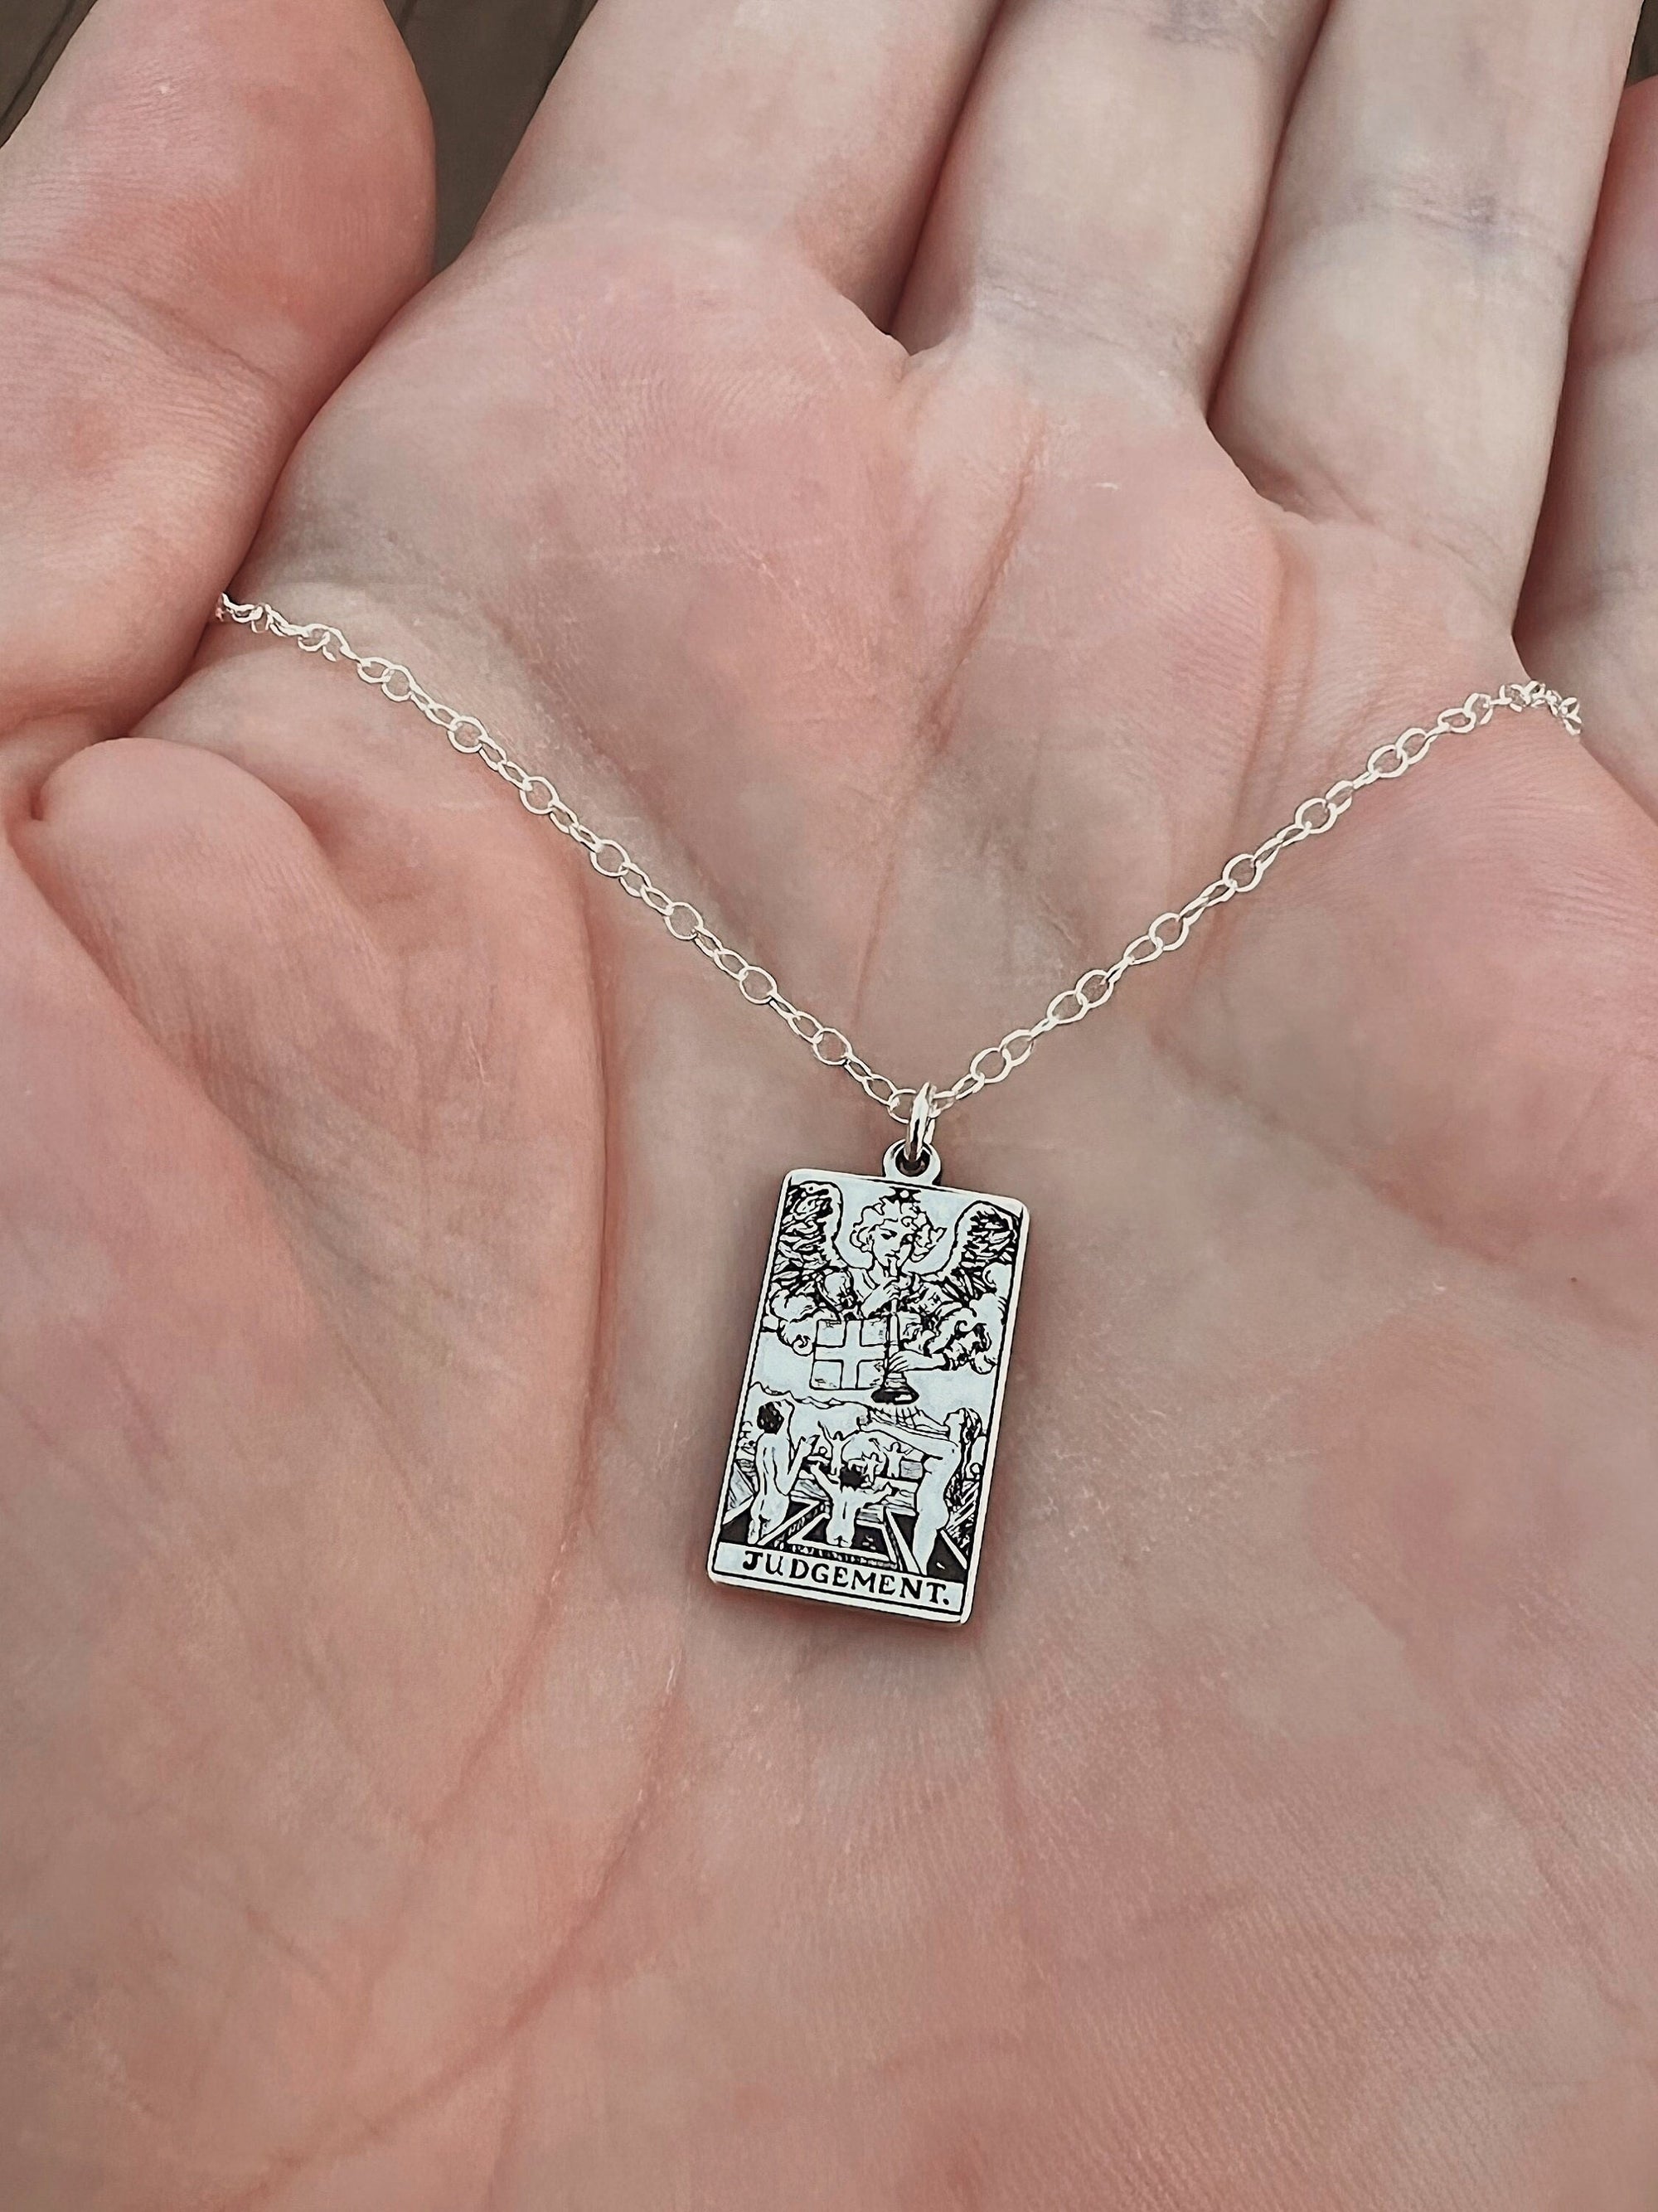 Judgement Tarot Card Necklace - Sterling Silver